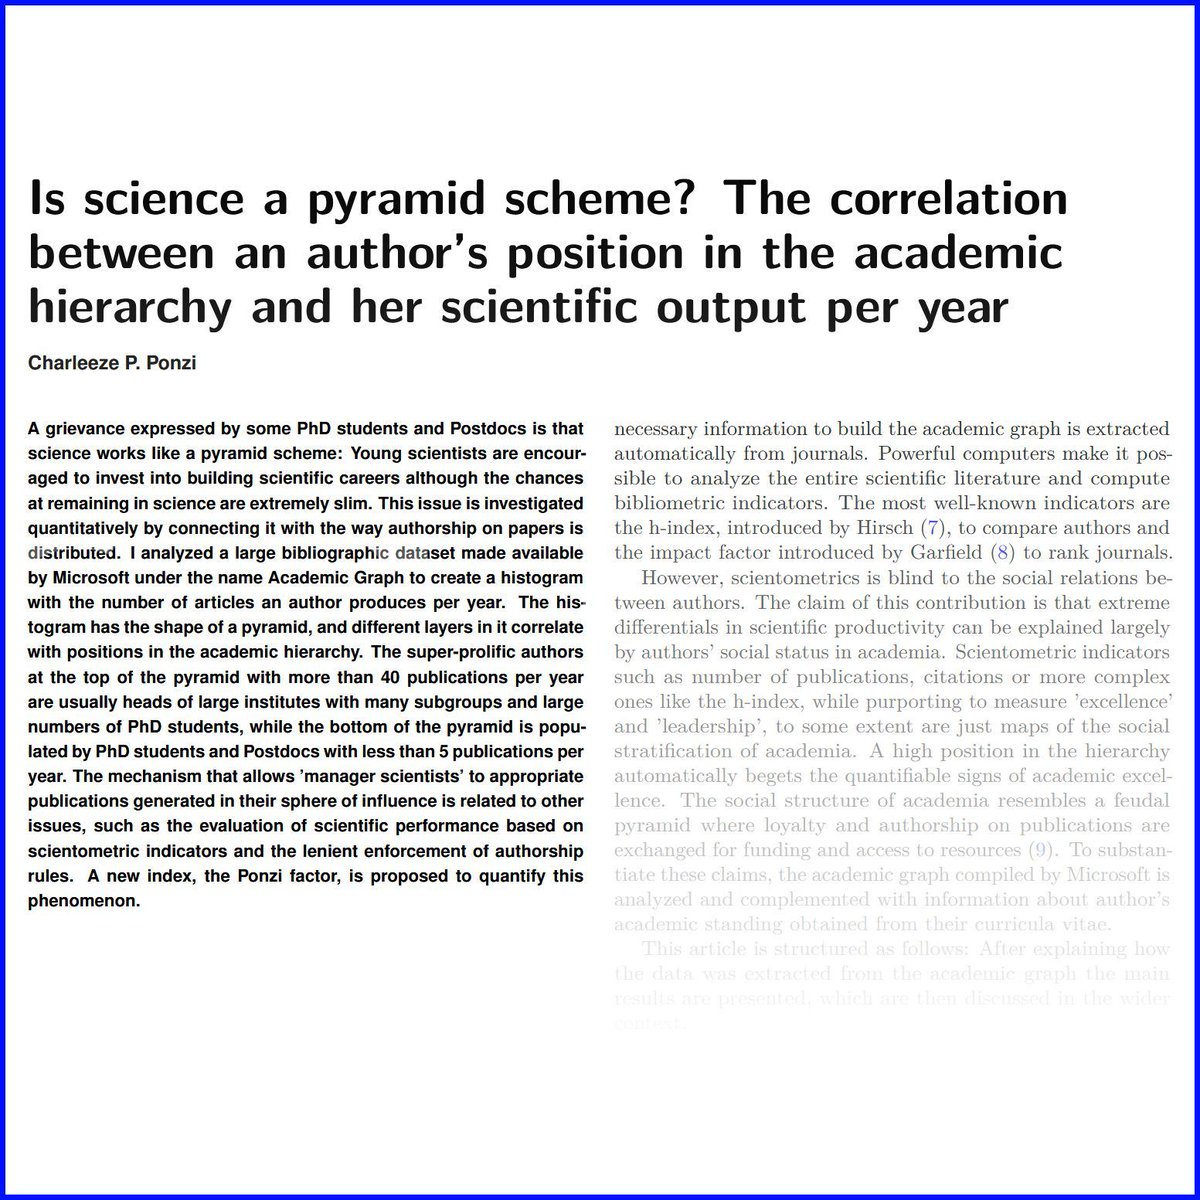 Is science a pyramid scheme? The correlation between an author's position in the academic hierarchy and her scientific output per year buff.ly/3xzrqX5